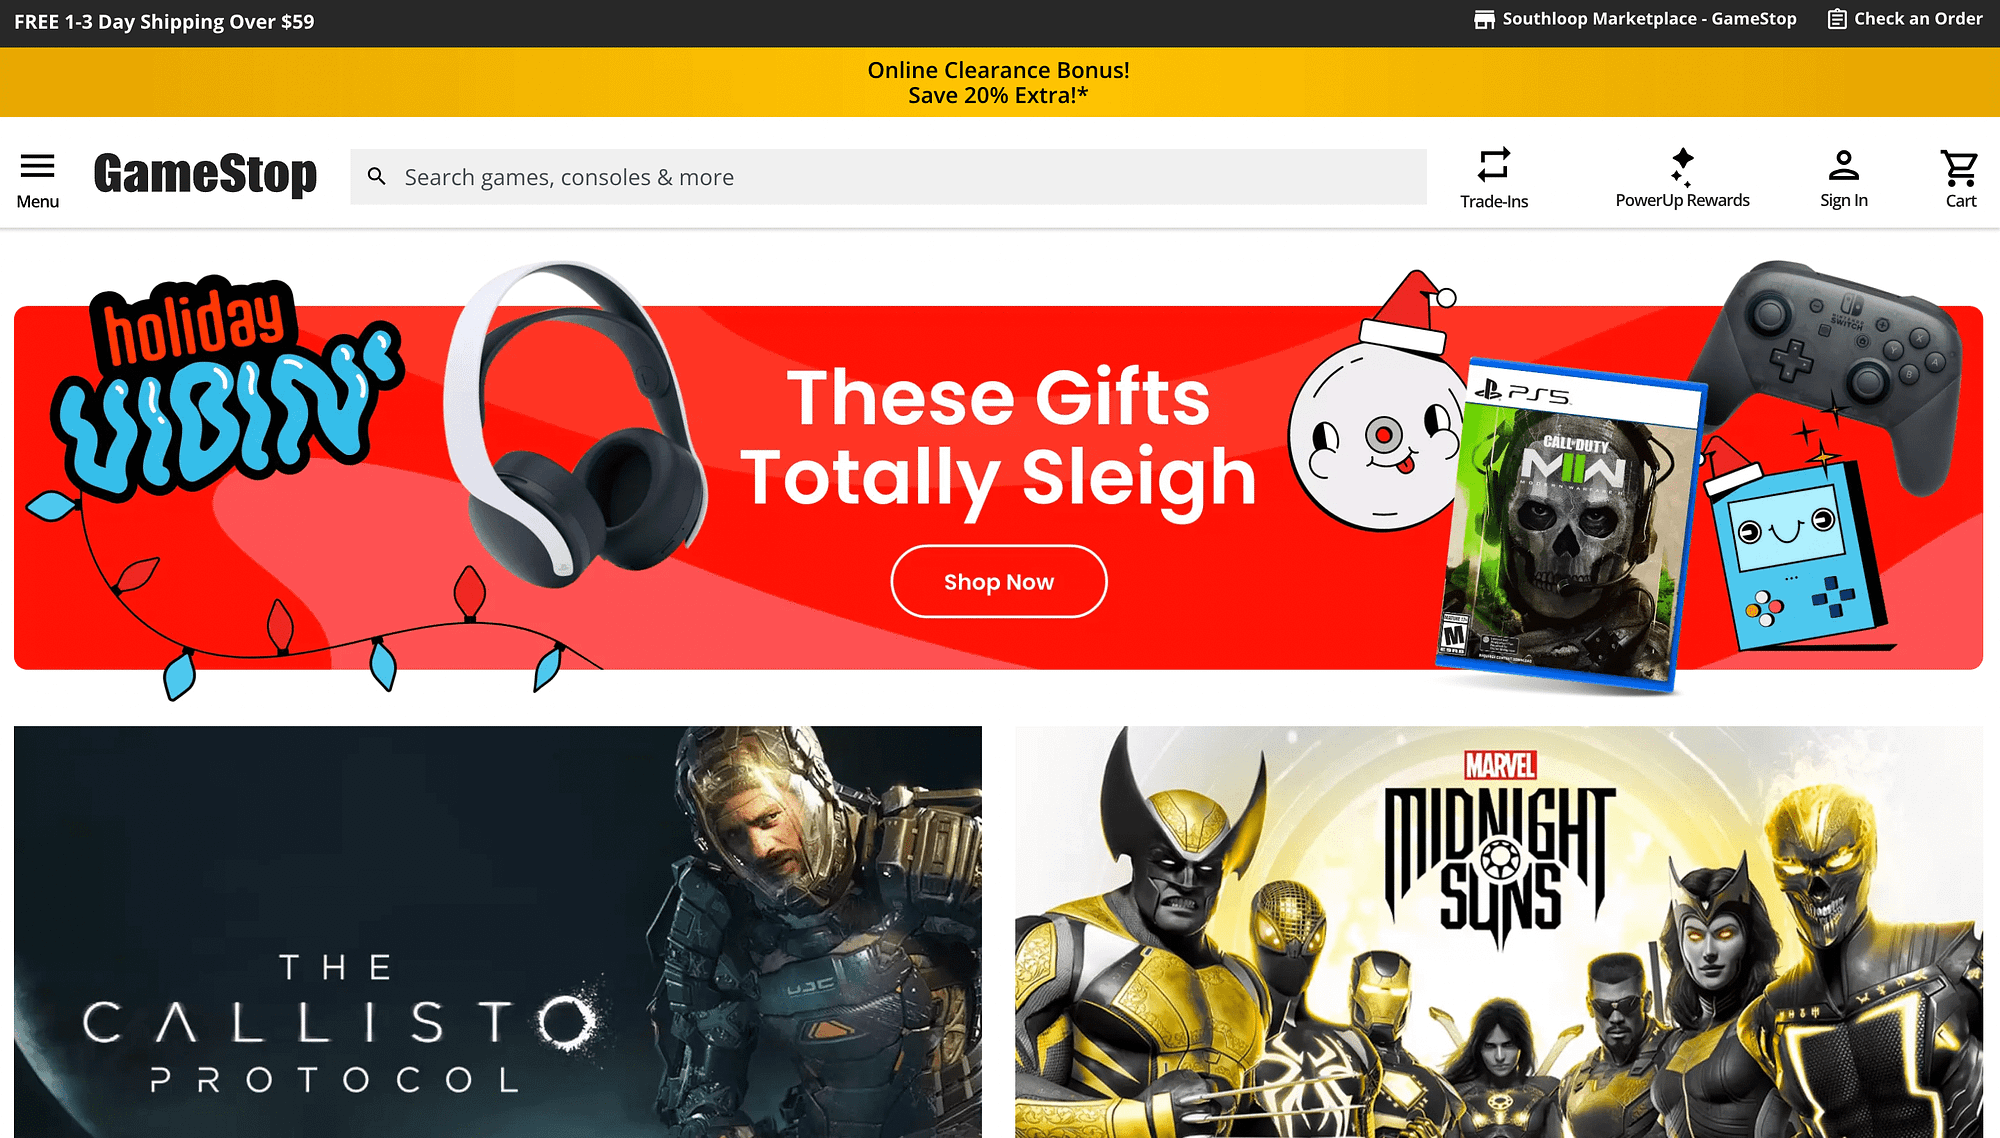 Gamestop's Christmas promotions.